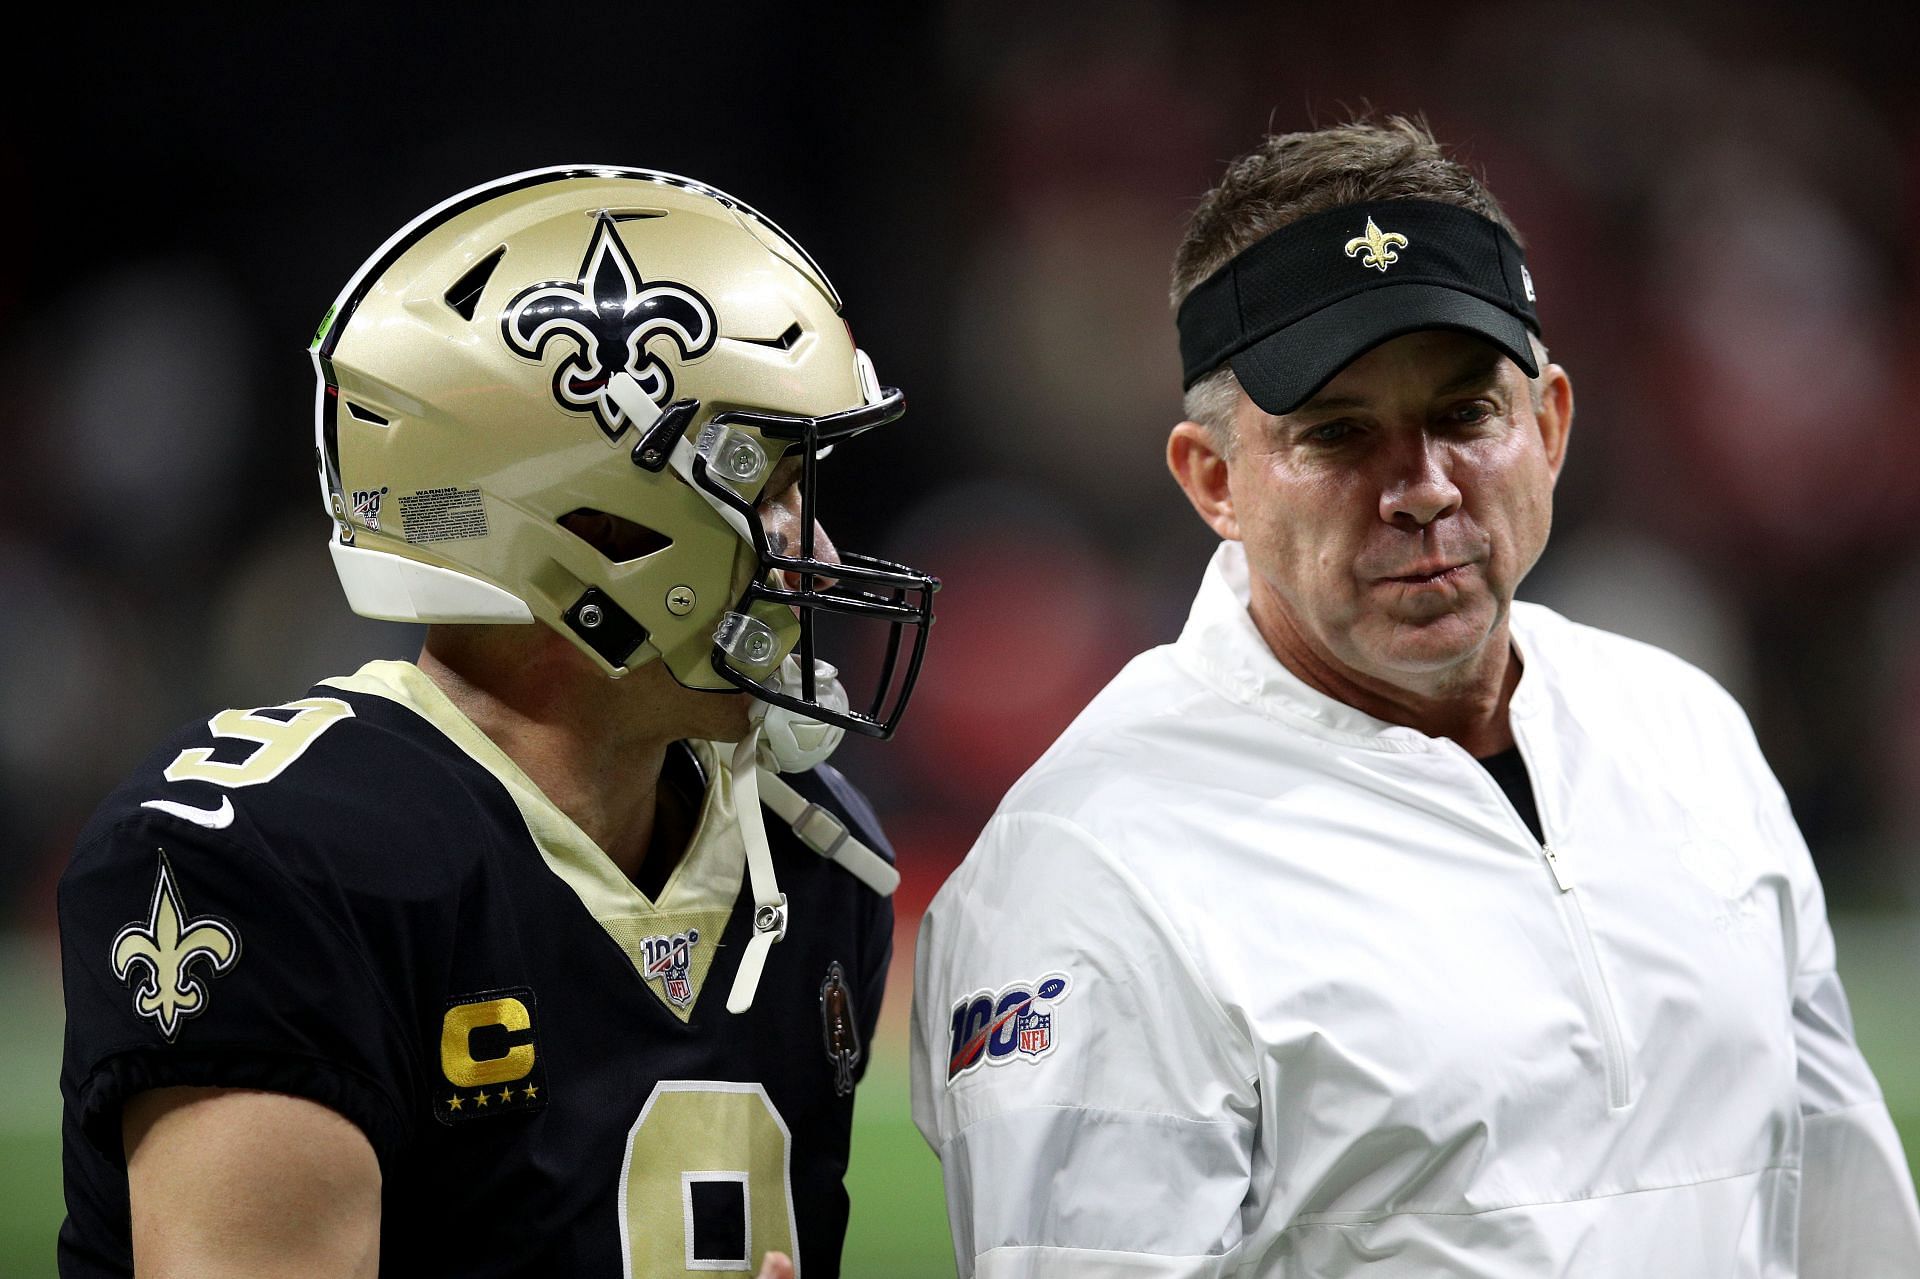 Drew Brees and Sean Payton with the New Orleans Saints